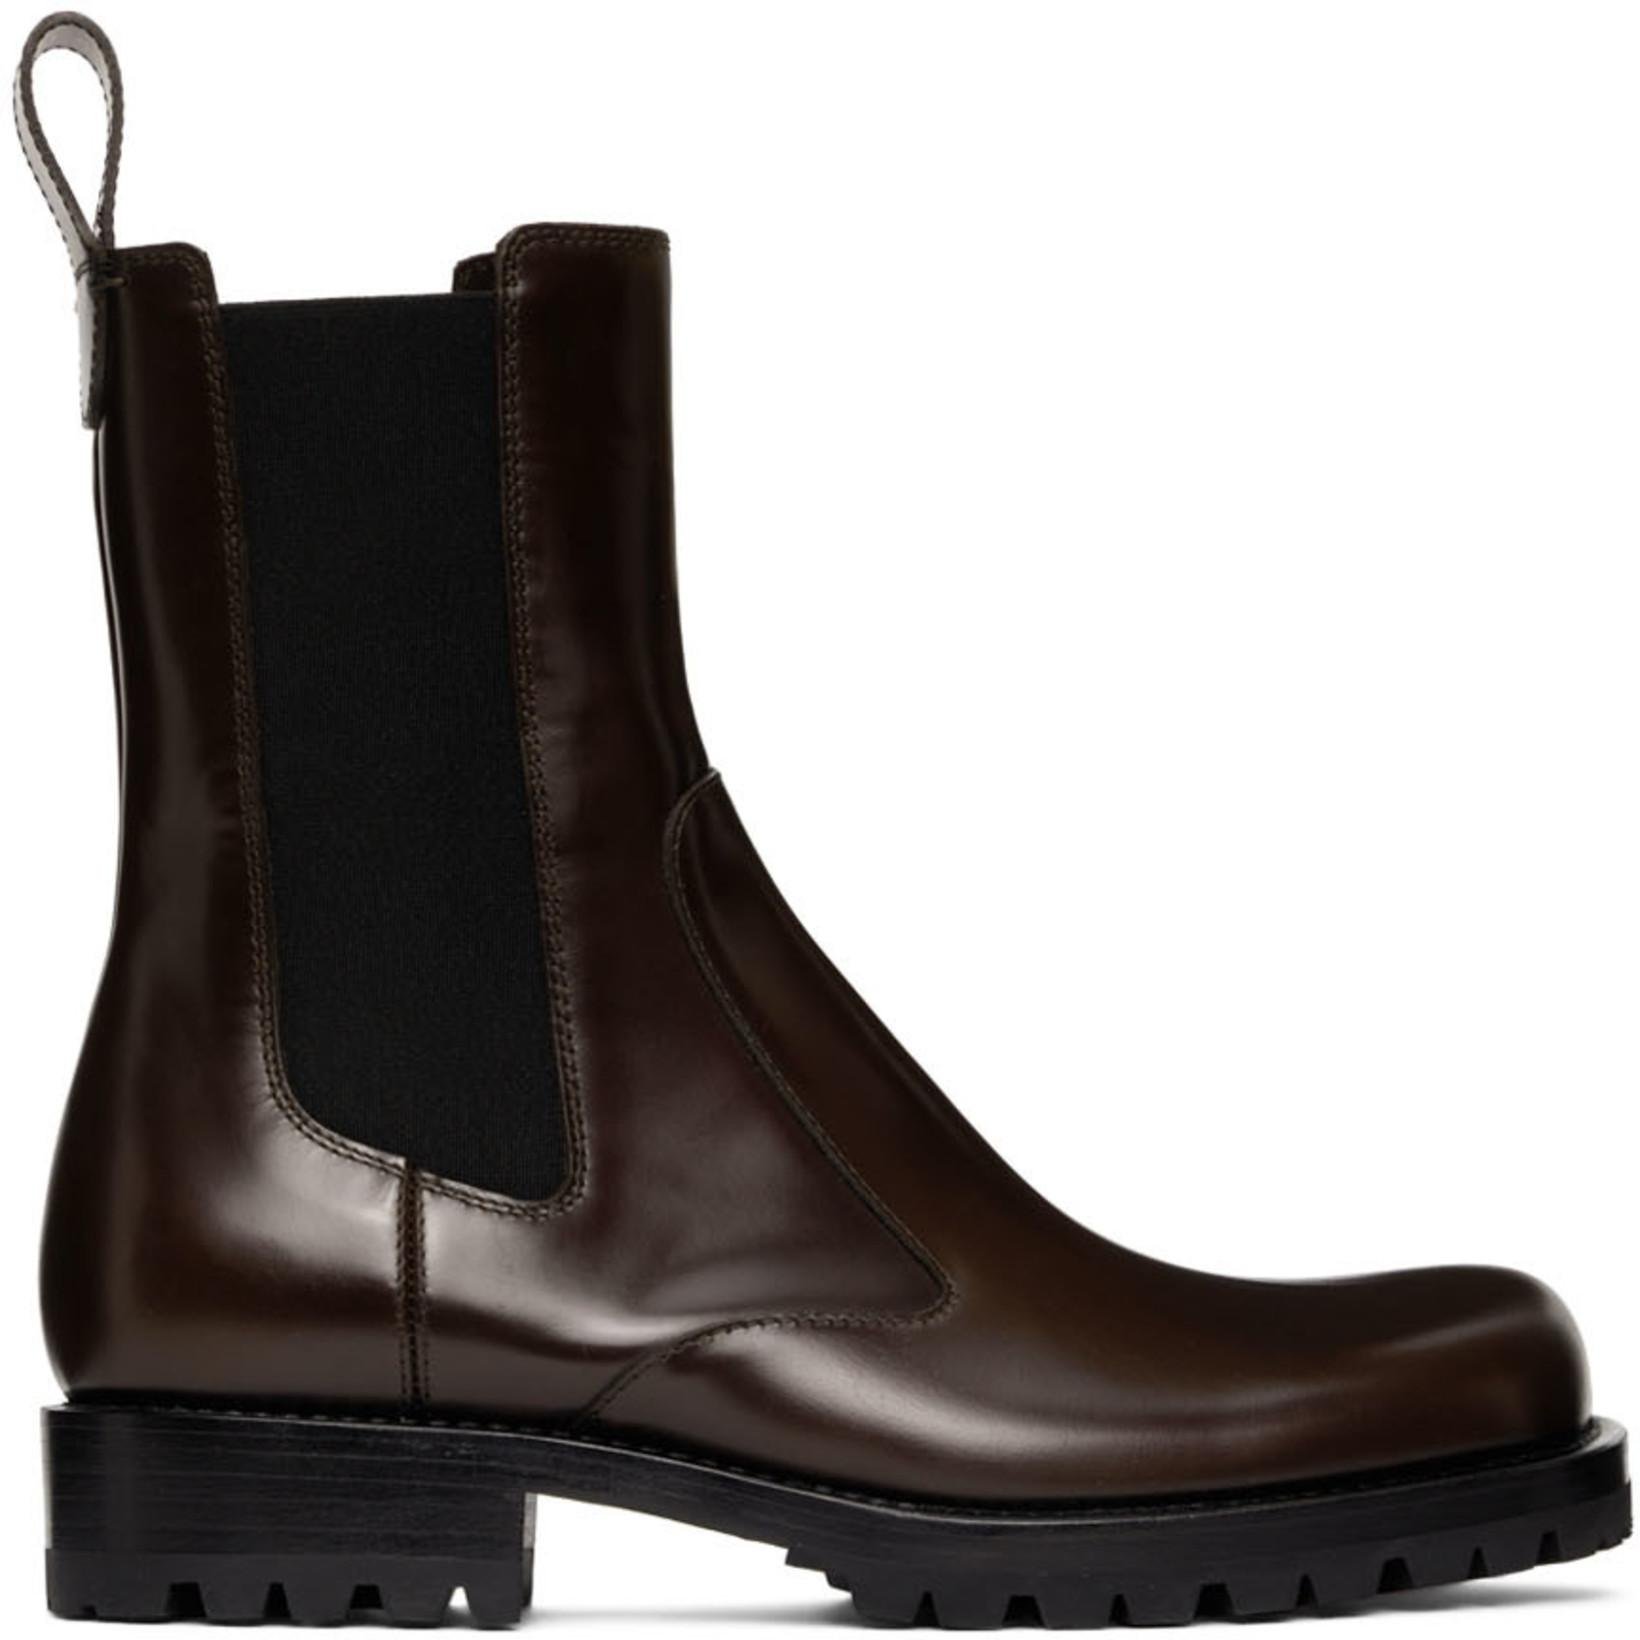 Brown Polished Leather Chelsea Boots by DRIES VAN NOTEN | jellibeans